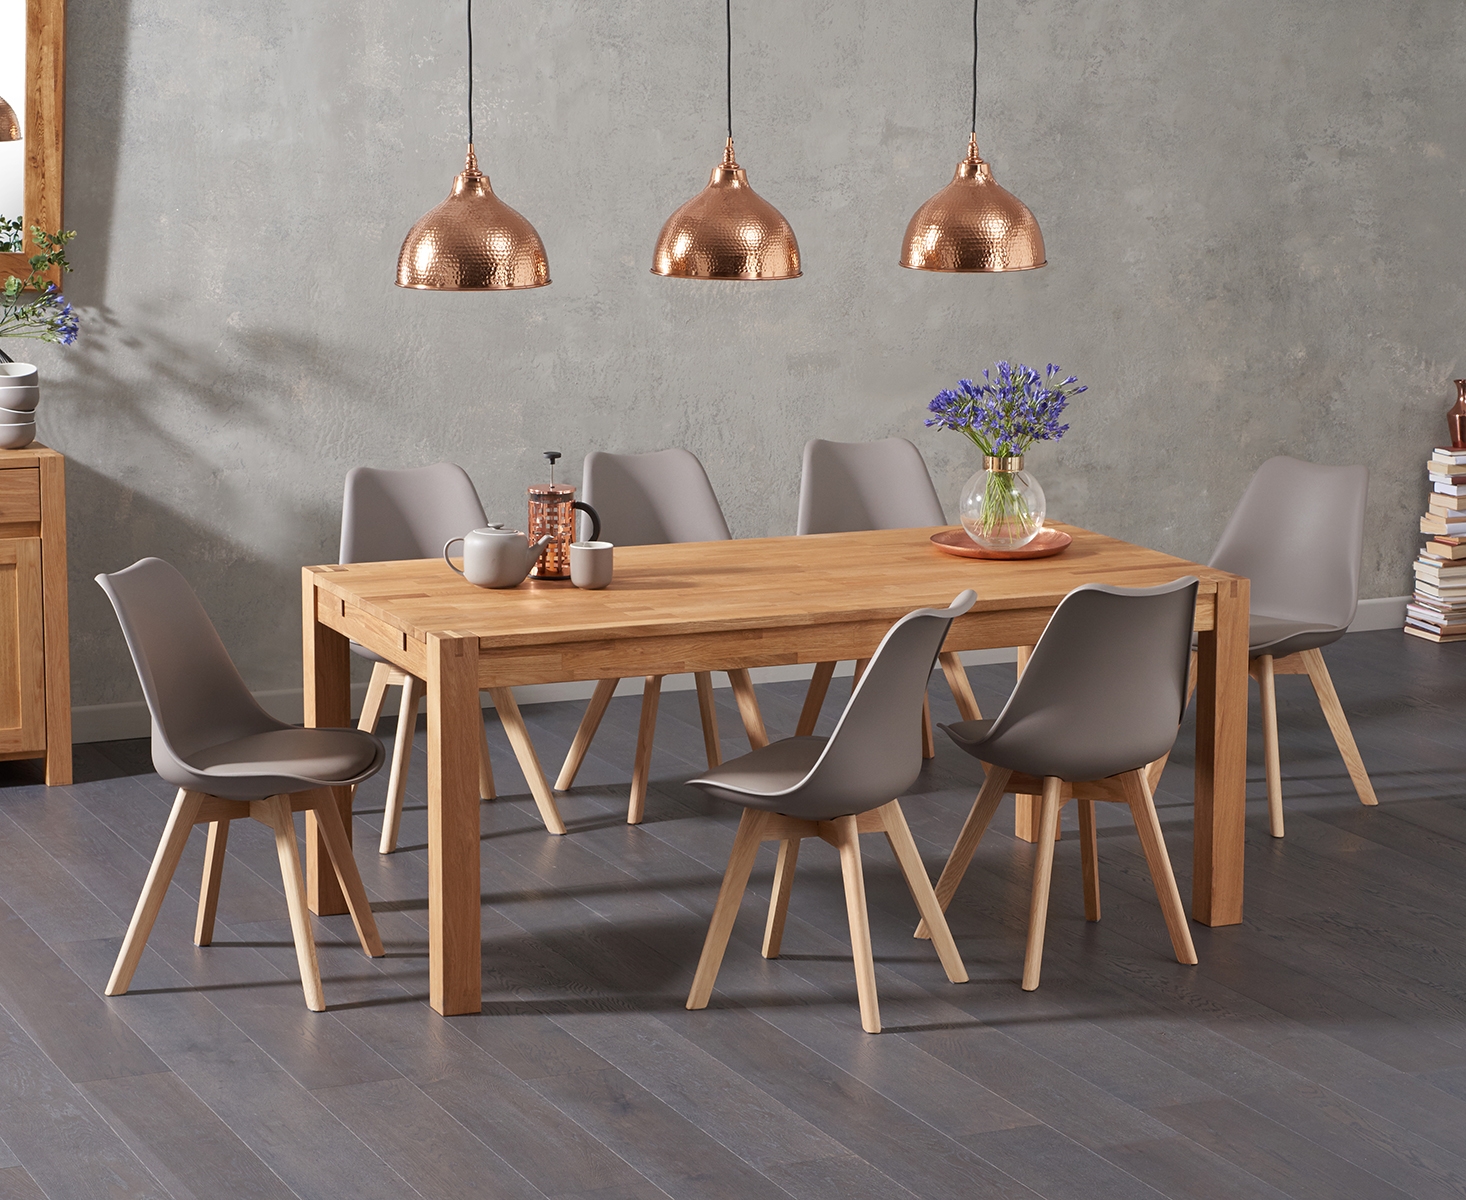 Verona 180cm Solid Oak Dining Table With 6 White Orson Faux Leather Chairs